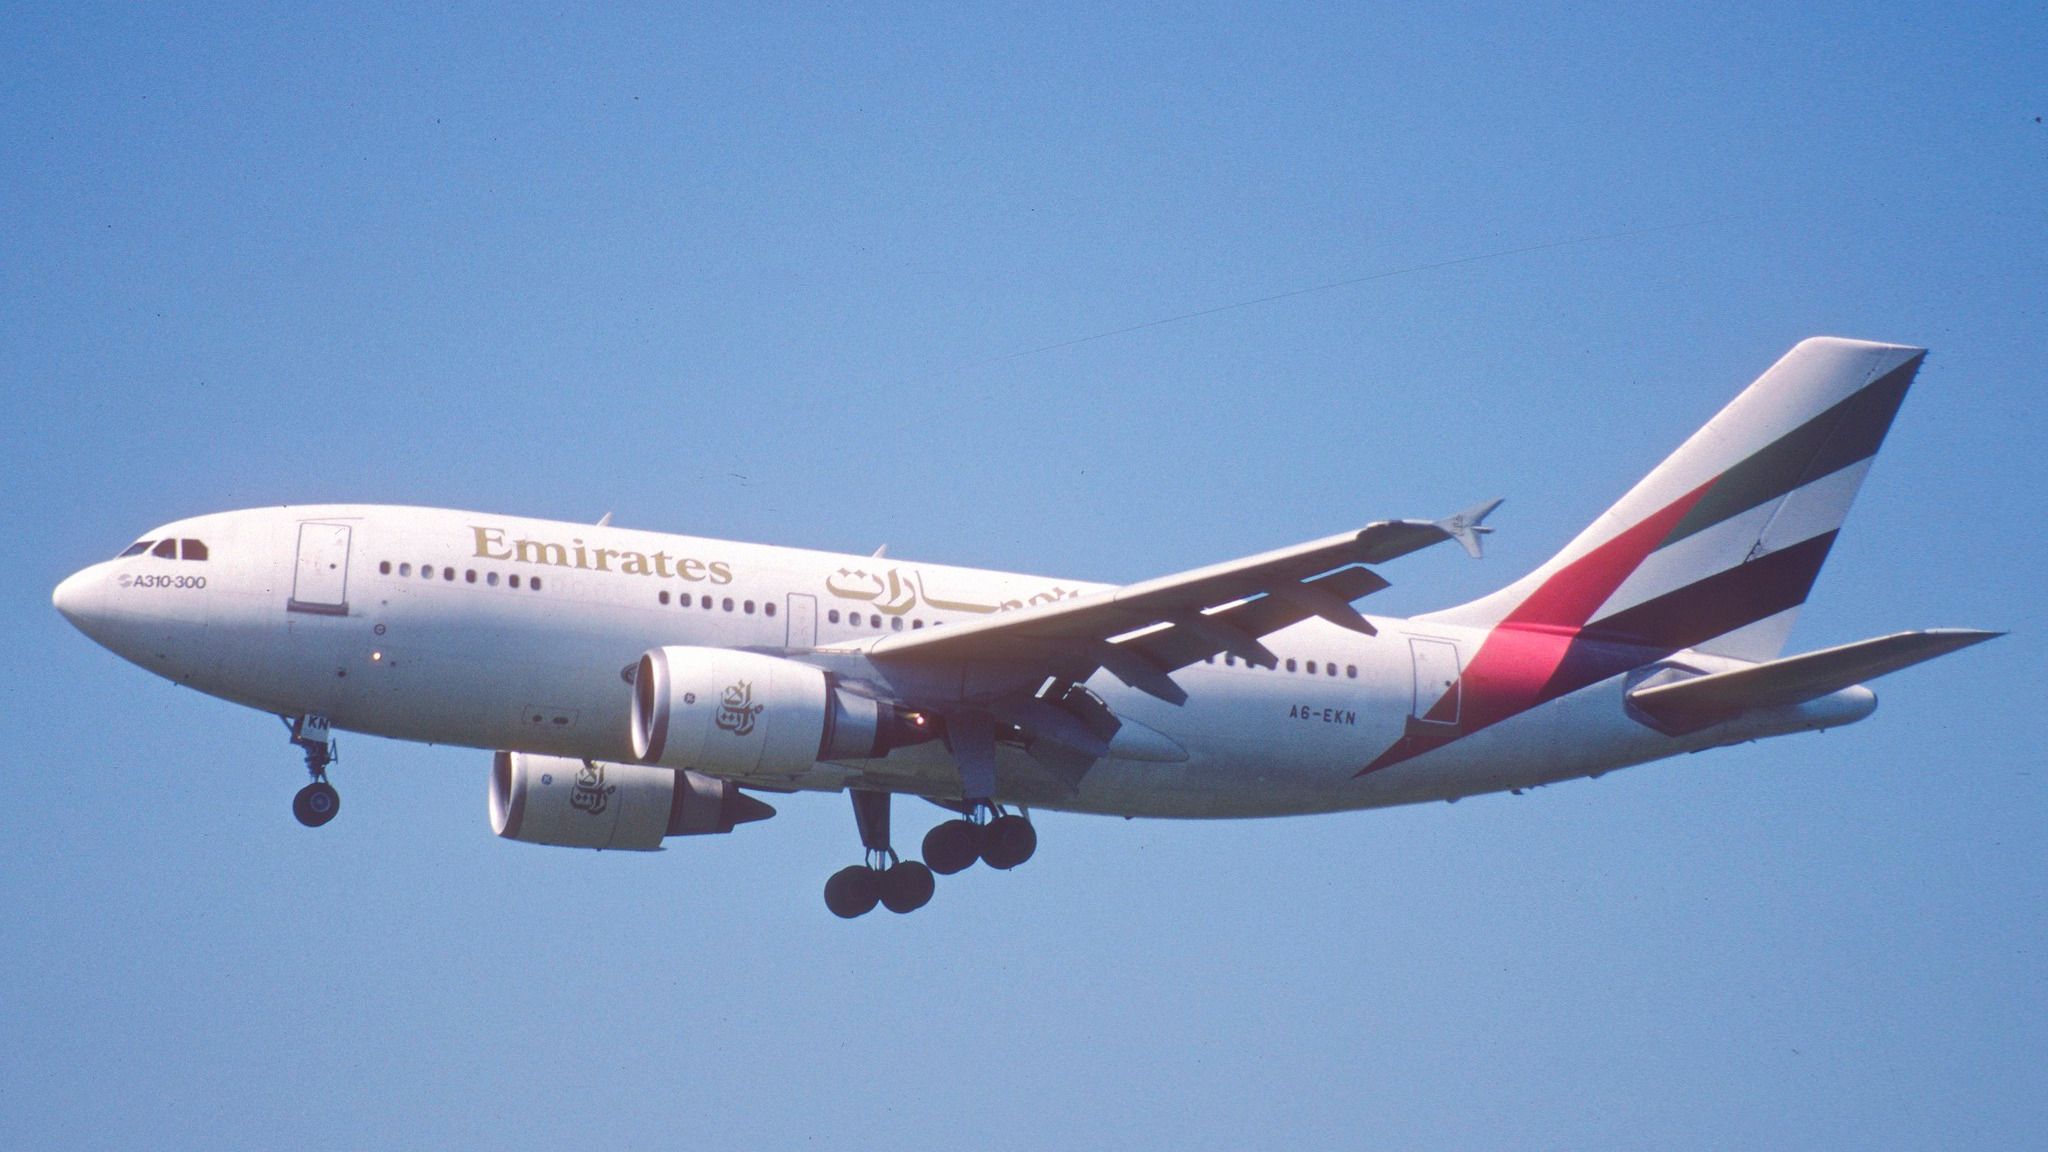 An Emirates Airbus A310-300 aircraft flying.